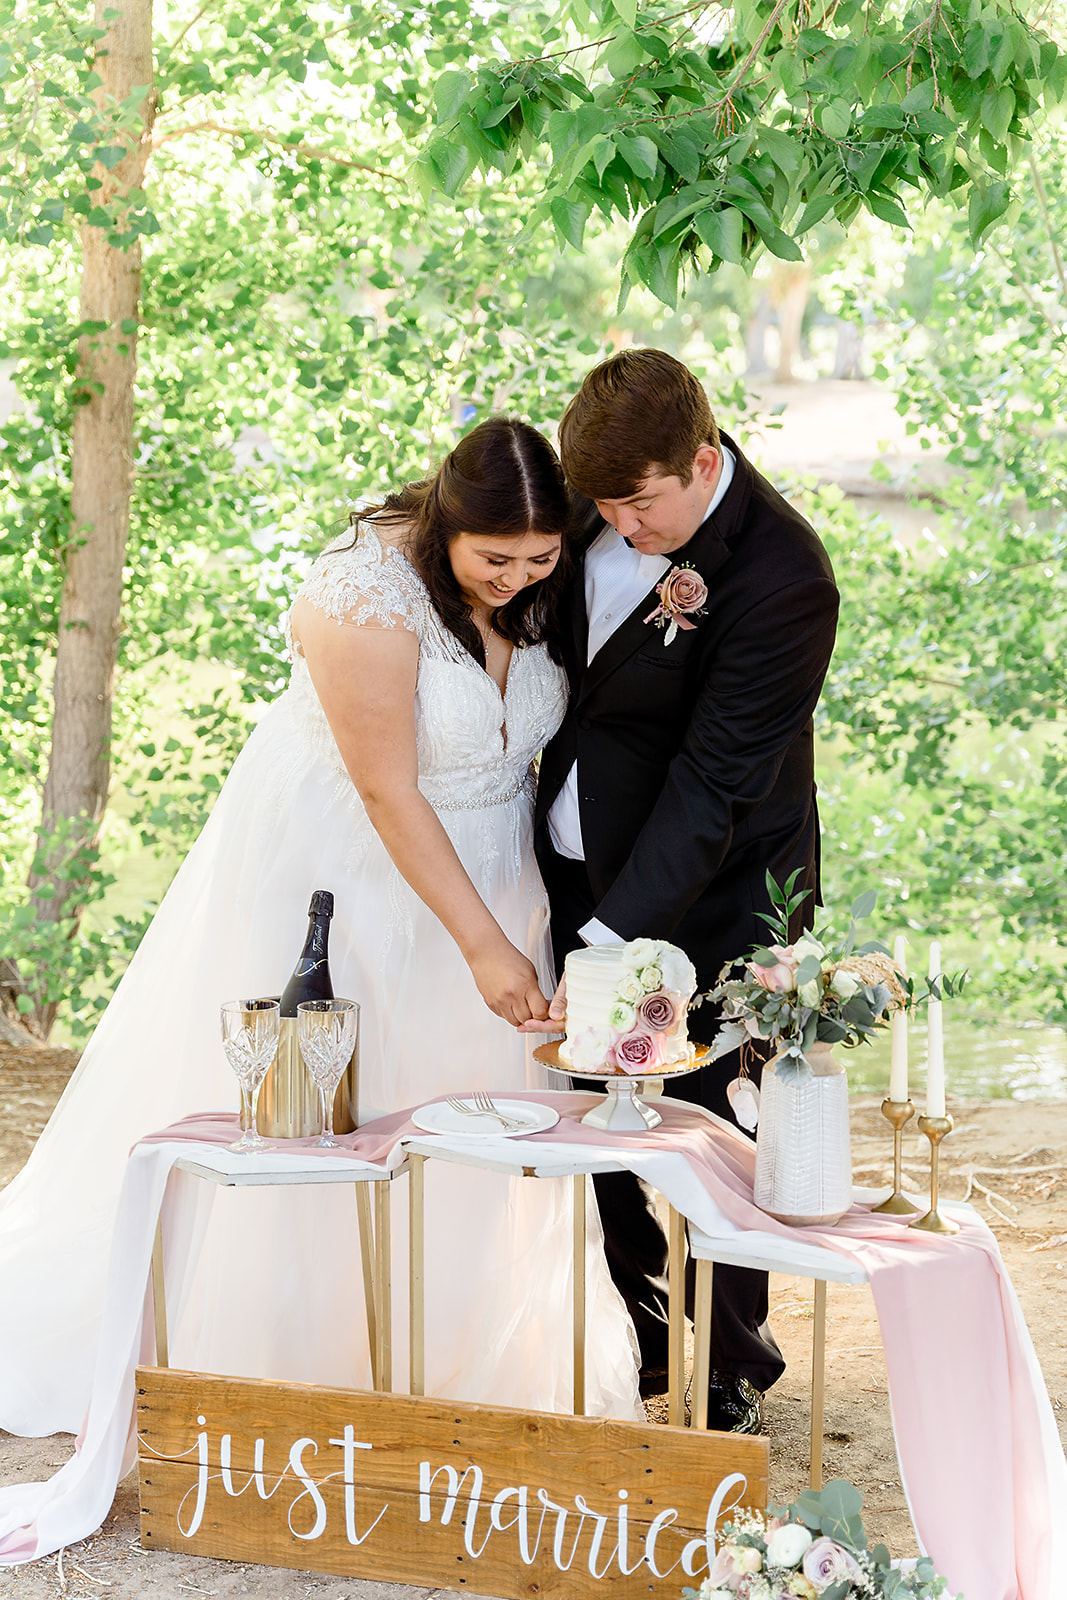 The Ultimate Tule Springs Wedding and Elopement Planning Guide. Couple cutting a slice of their wedding cake together.